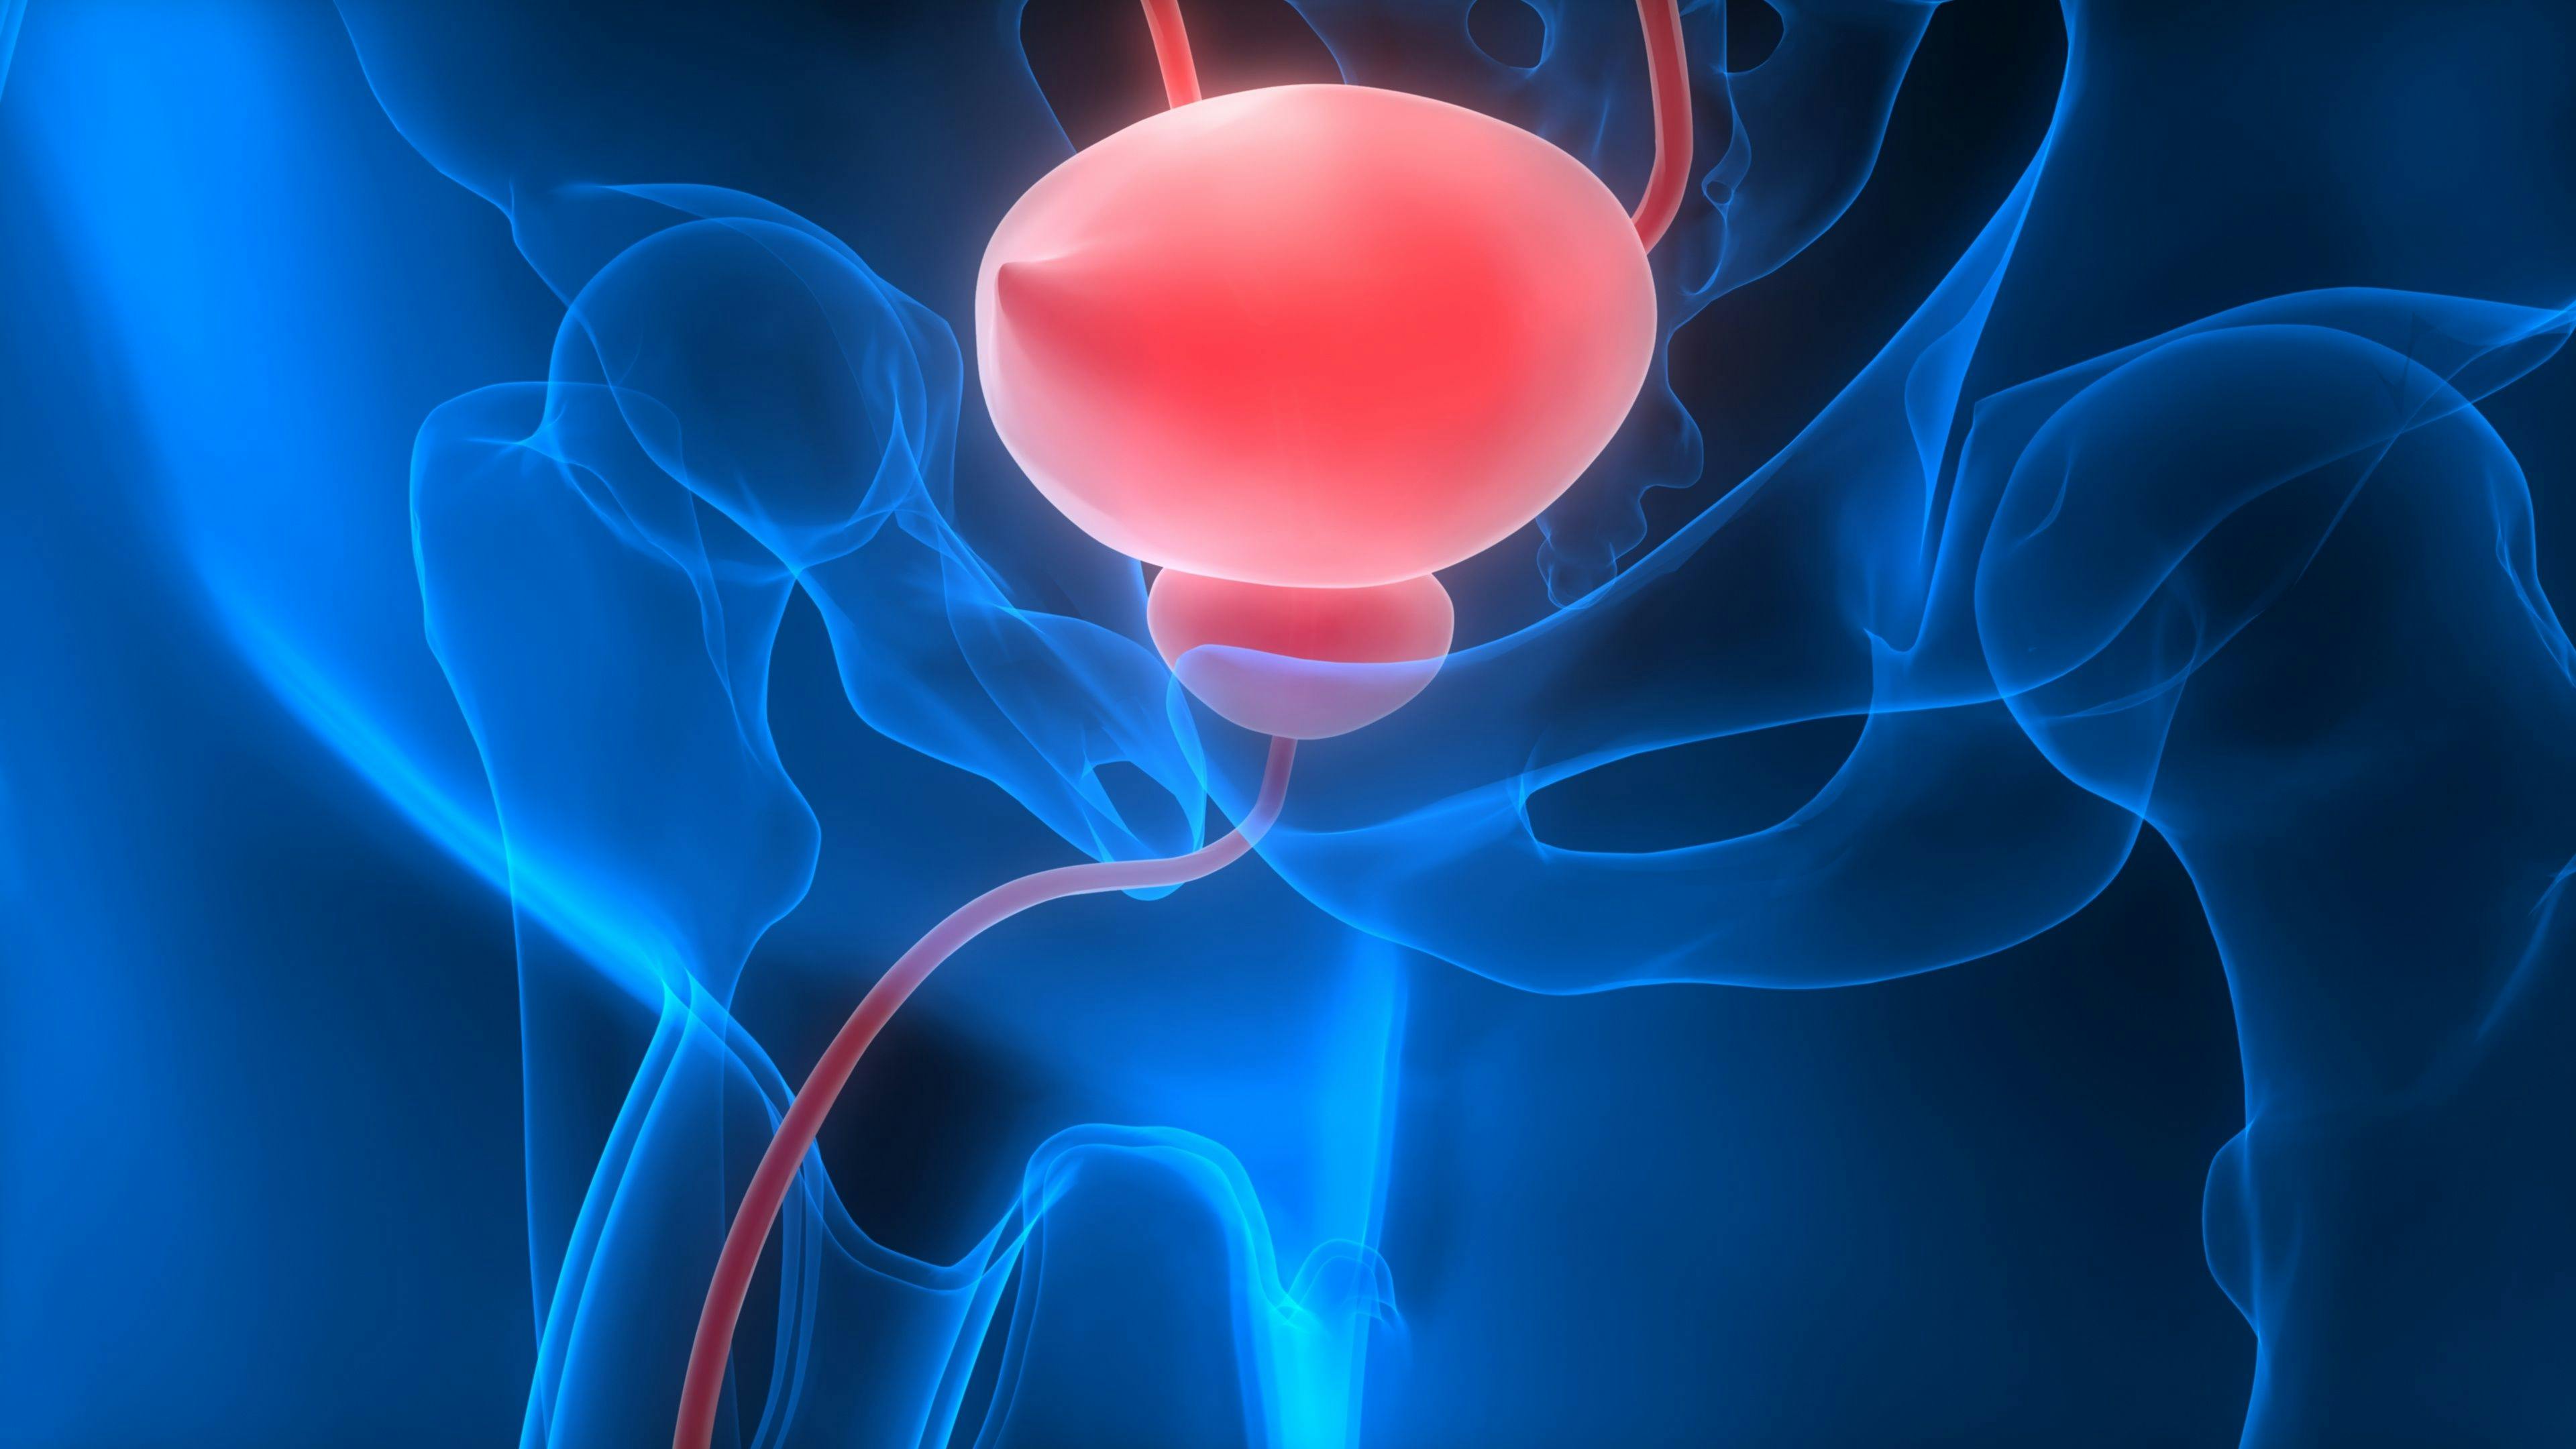 NMI Bladder Cancer Gene Therapy Shows Promising Safety and Efficacy in Phase 1 Trial